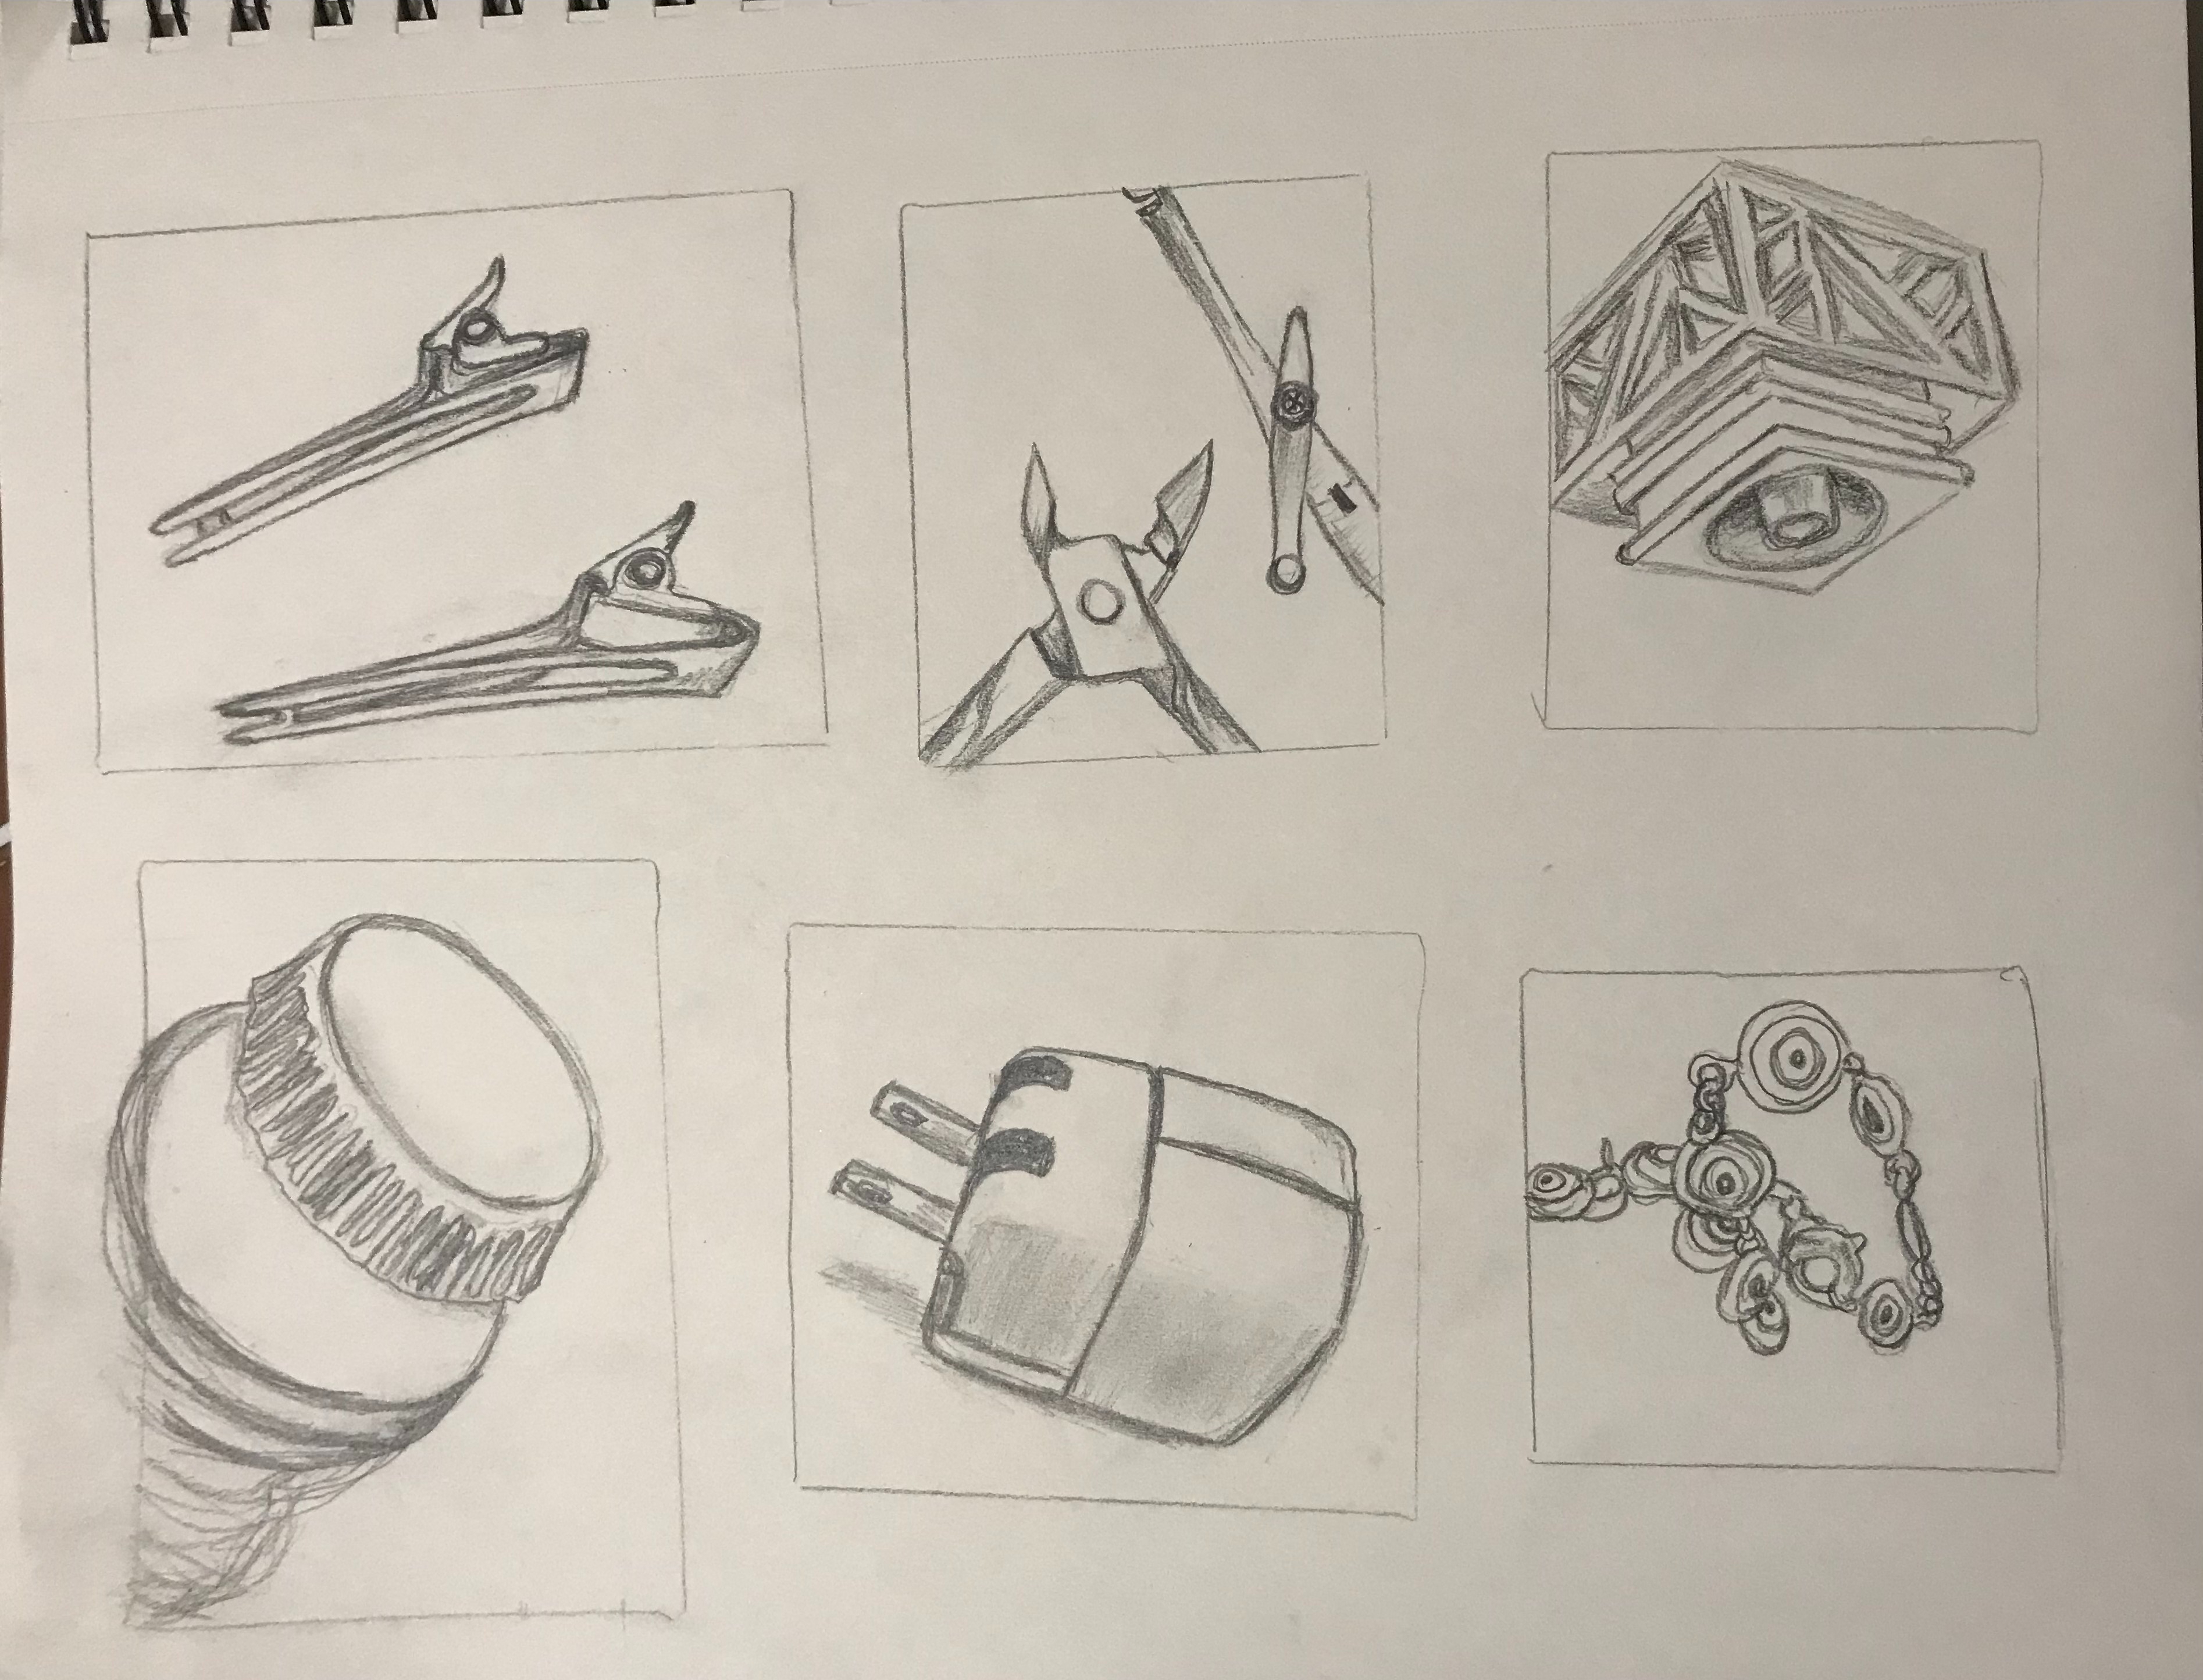 Thumbnail Sketches and Grid Transpositions